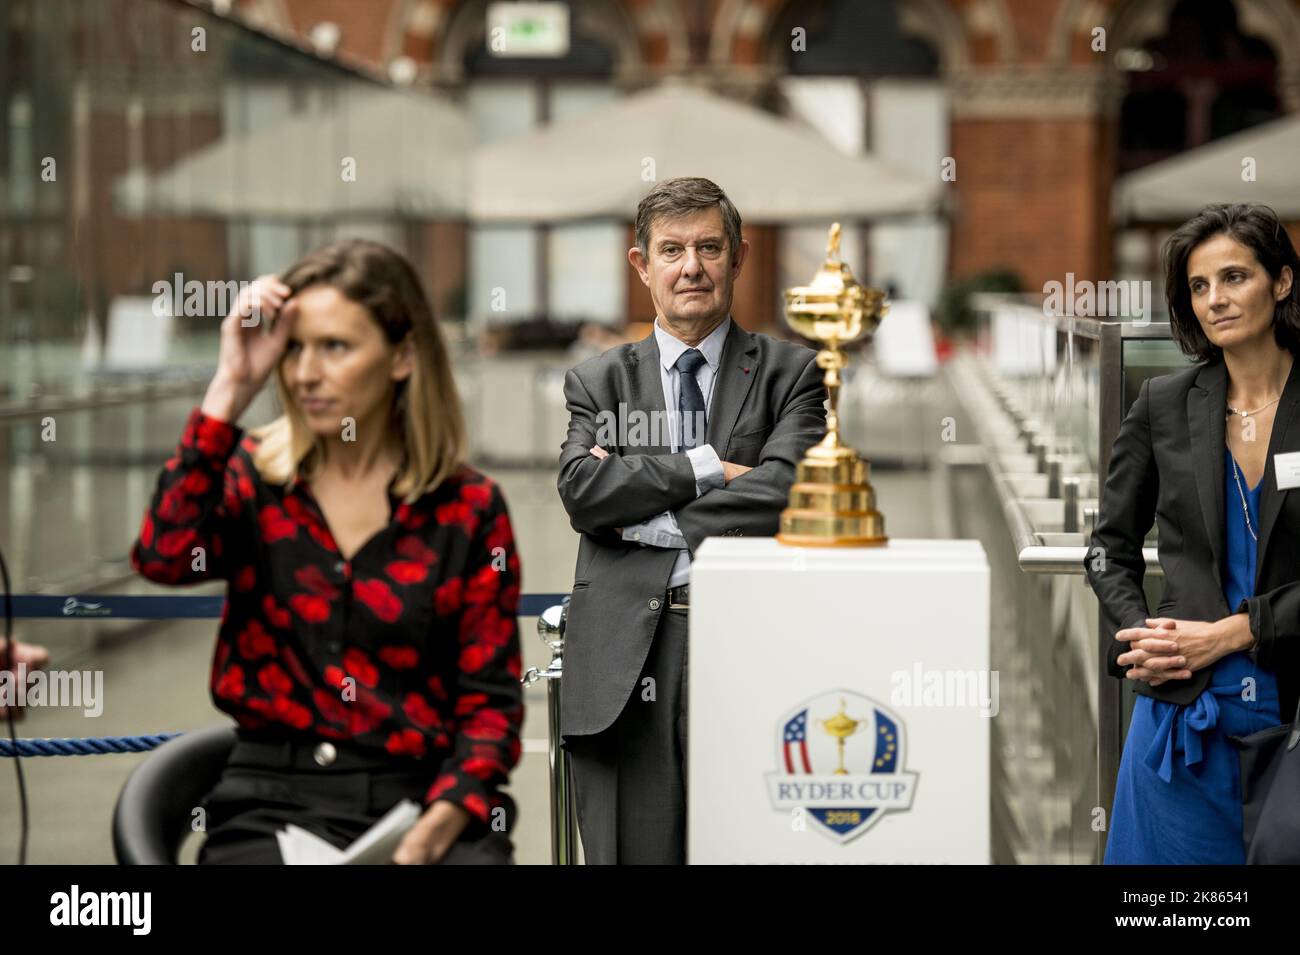 Jean-Pierre Jouyet UK ambassador for France attends a Ryder Cup Media call - Rendezvous King Cross Train Station UK in association with Atout France Tourism and Eurostar to promote next year's Ryder Cup at Golf Le National Stock Photo